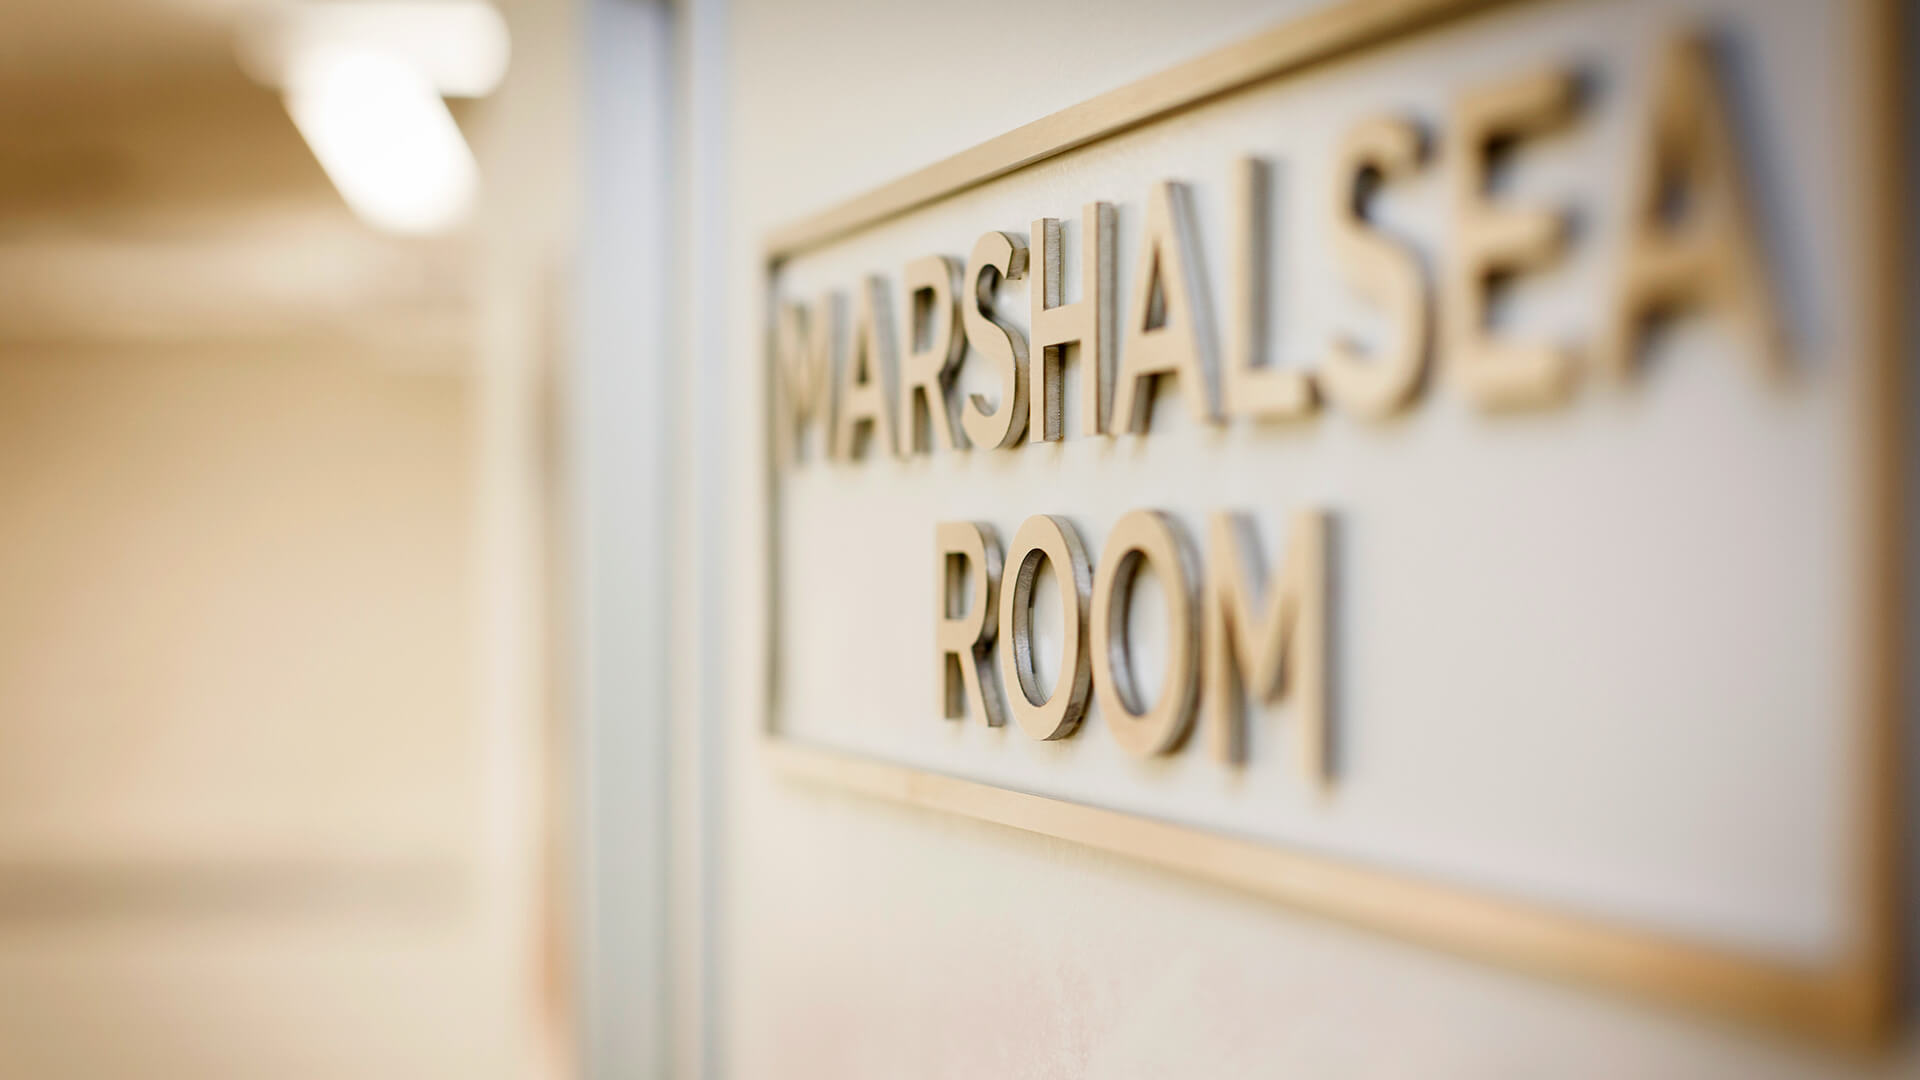 Close-up of a sign reading "Marshalsea Room"